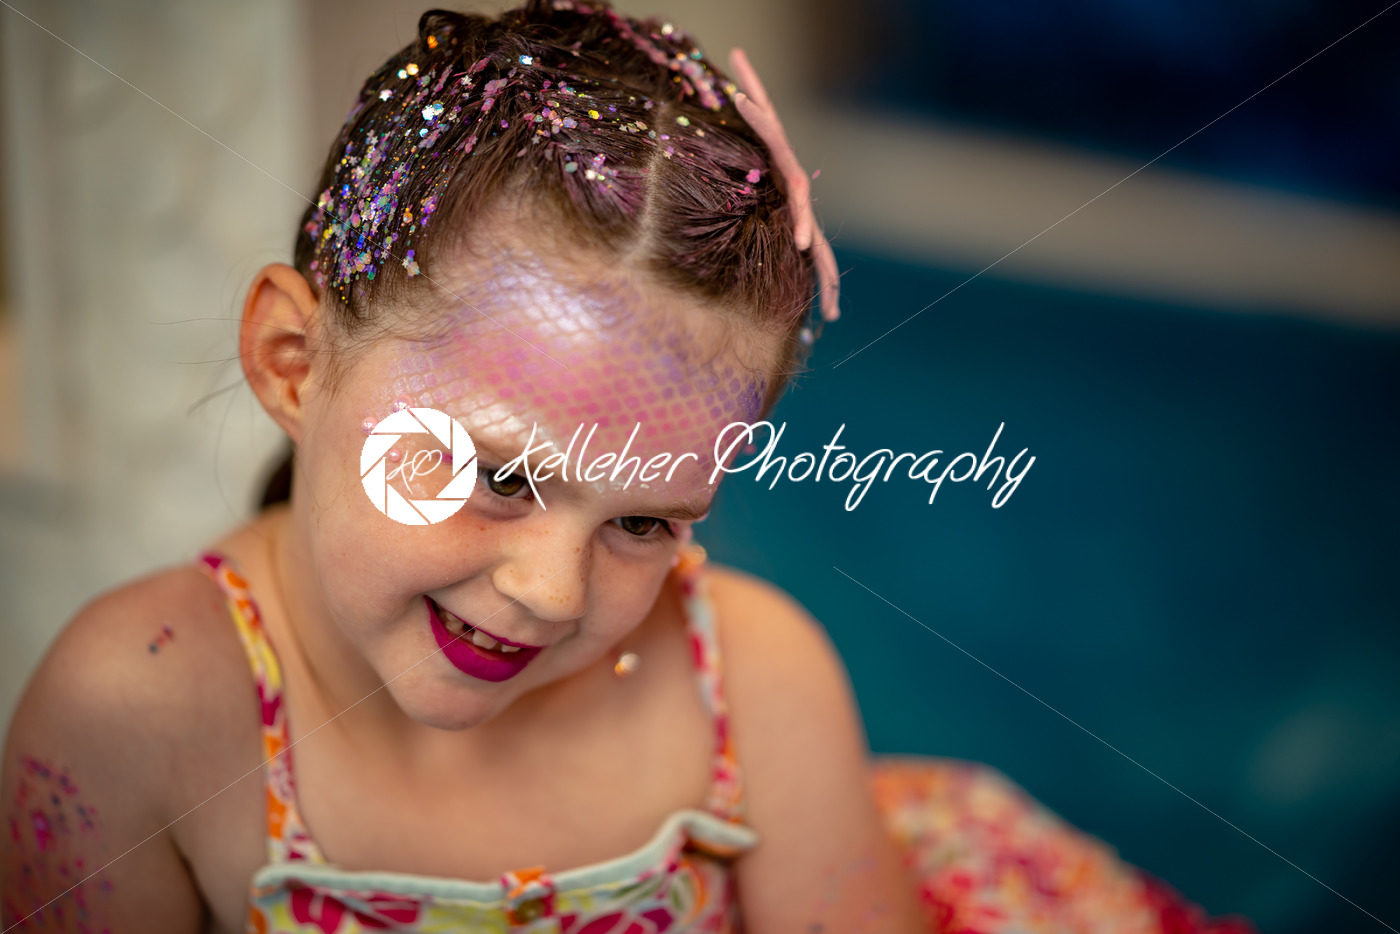 Portrait of a beautiful young mermaid girl at salon getting makeup on - Kelleher Photography Store